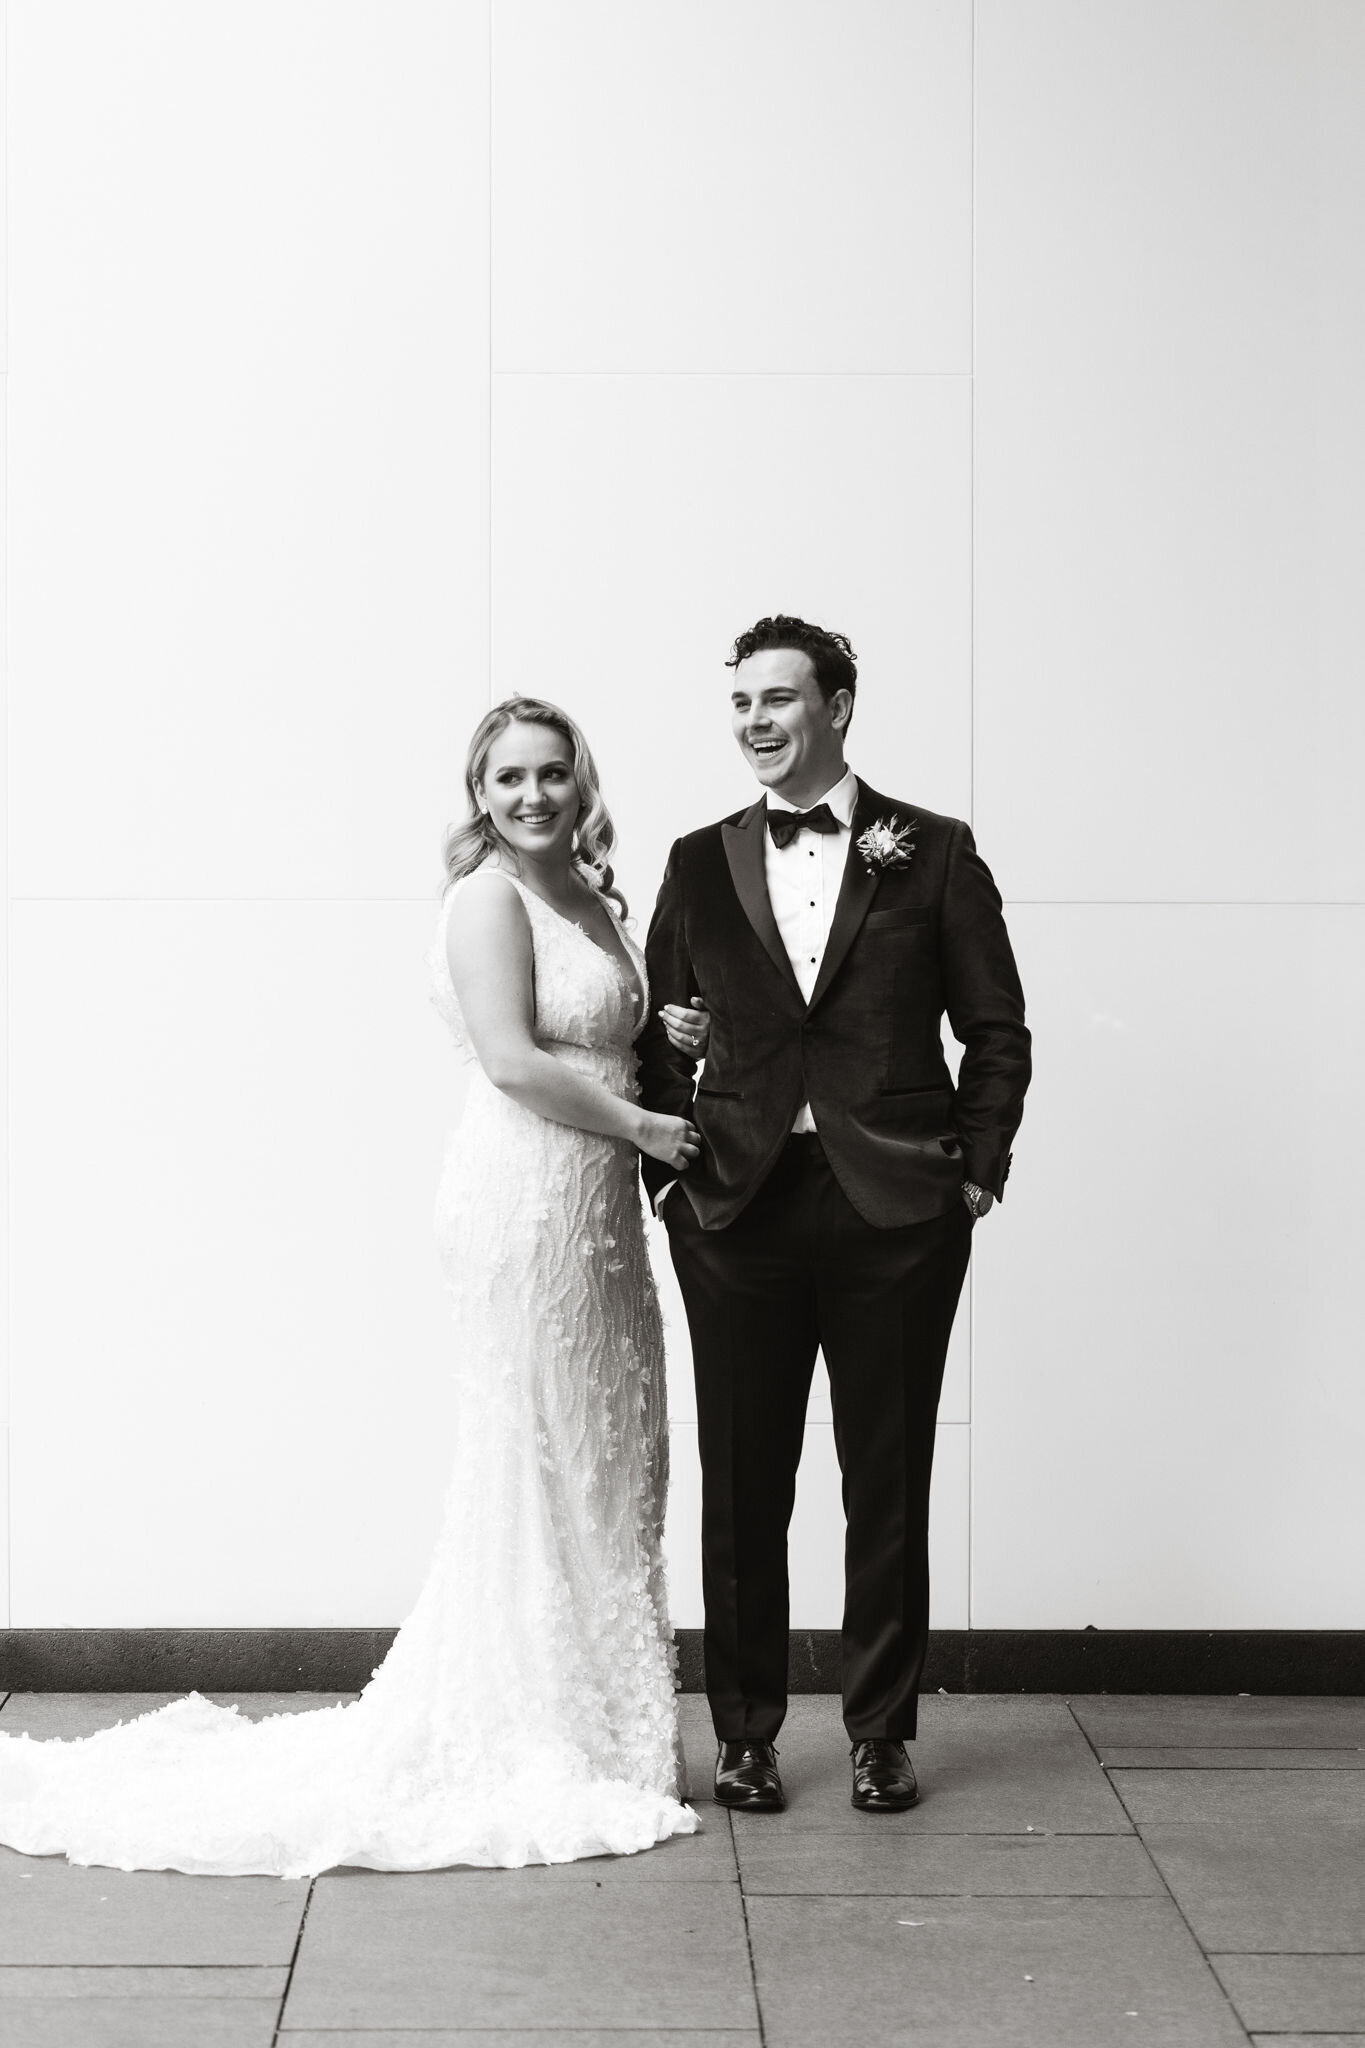 DANIELLE + ANDREAS &lt;strong&gt;CLASSIC INDUSTRIAL WEDDING&lt;/strong&gt;